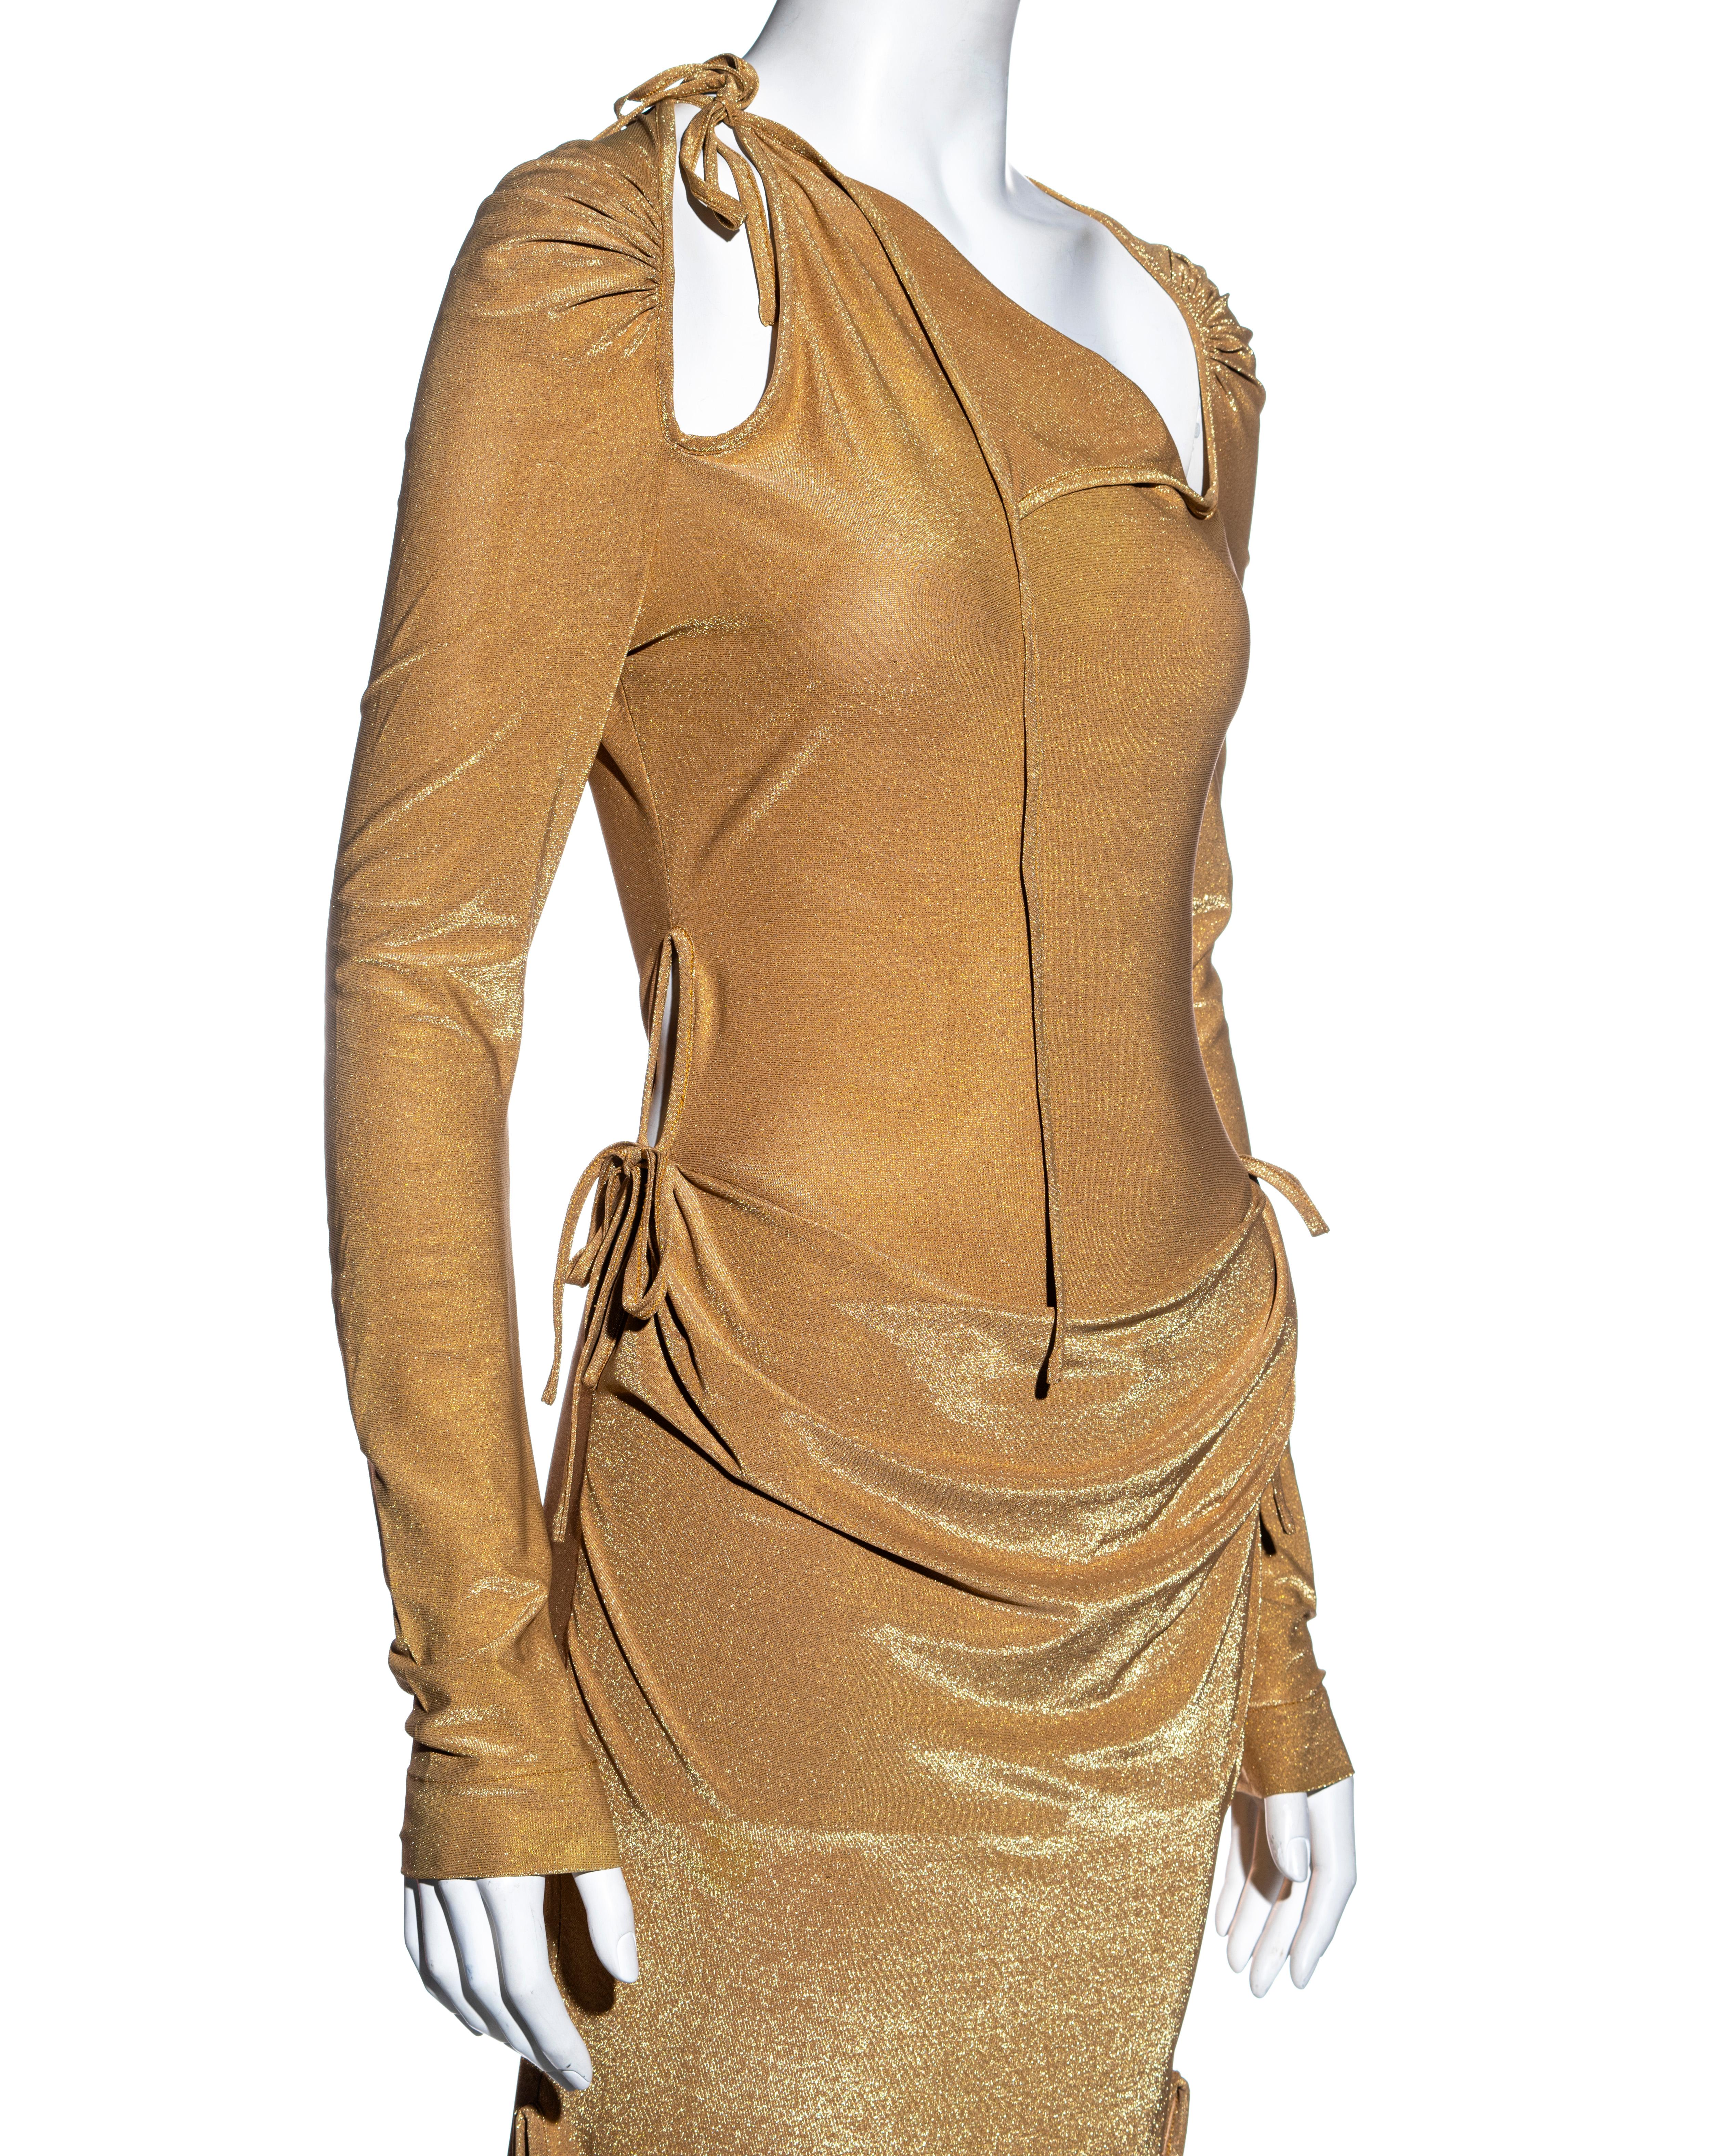 Vivienne Westwood gold stretch lurex evening dress with cut outs, fw 1997 3